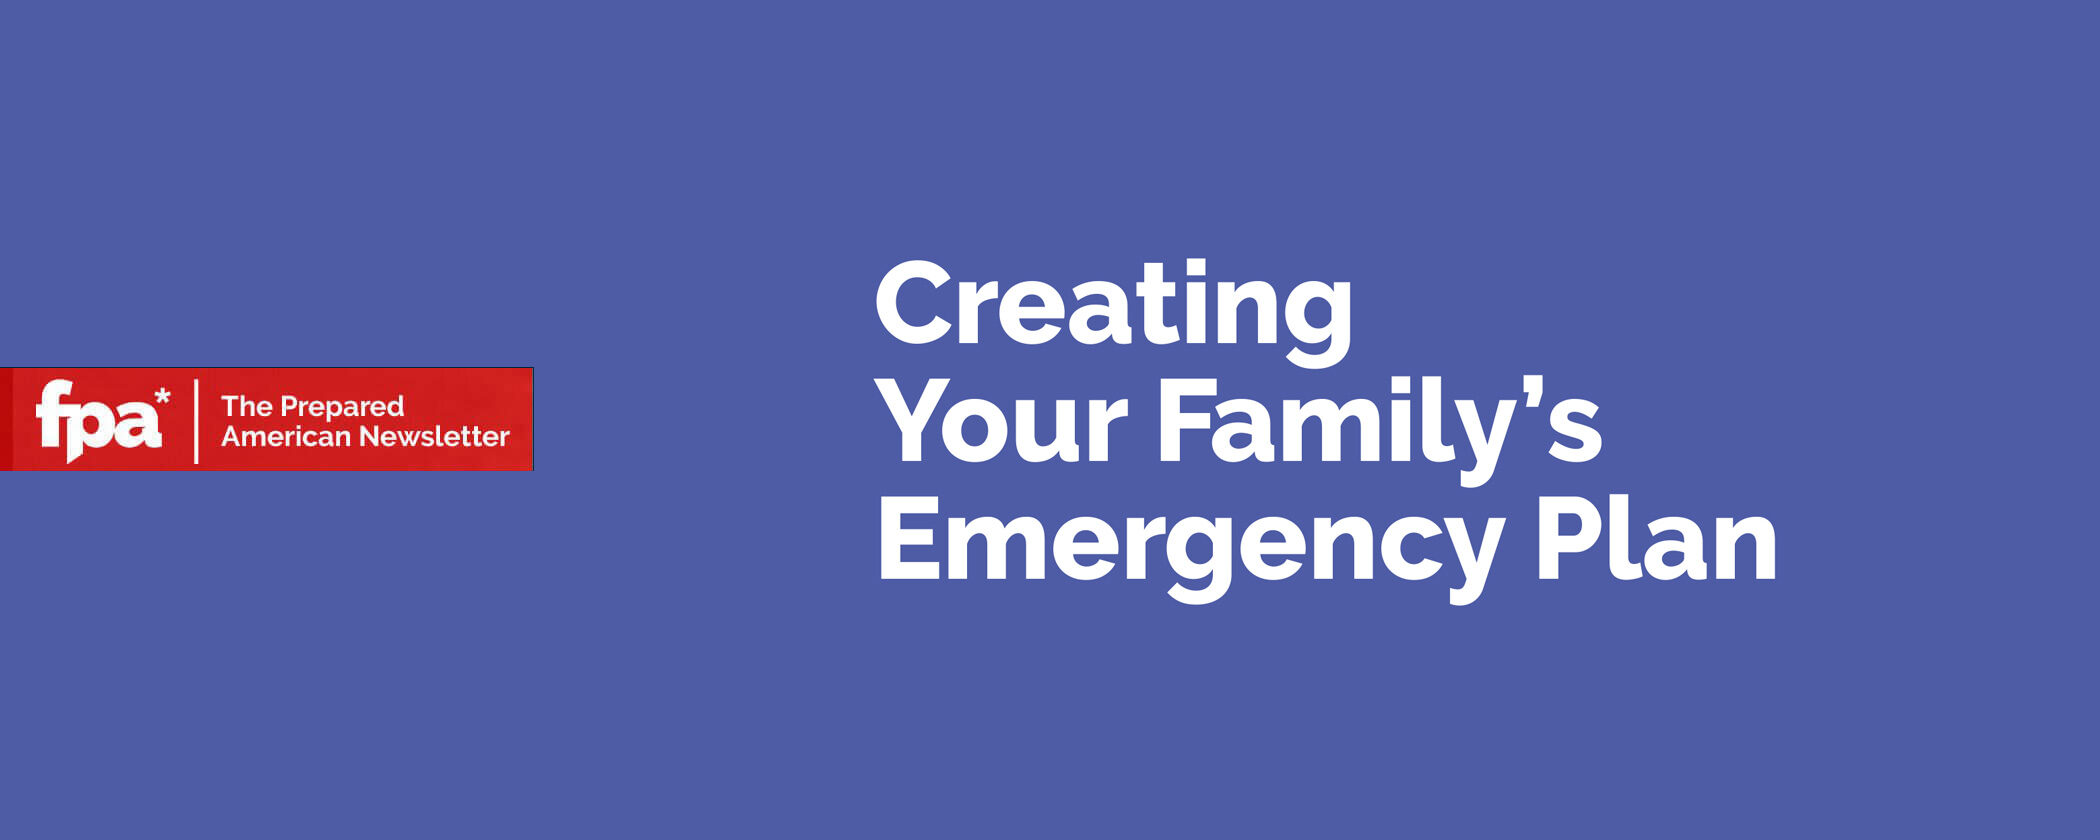 Creating Your Family’s Emergency Plan